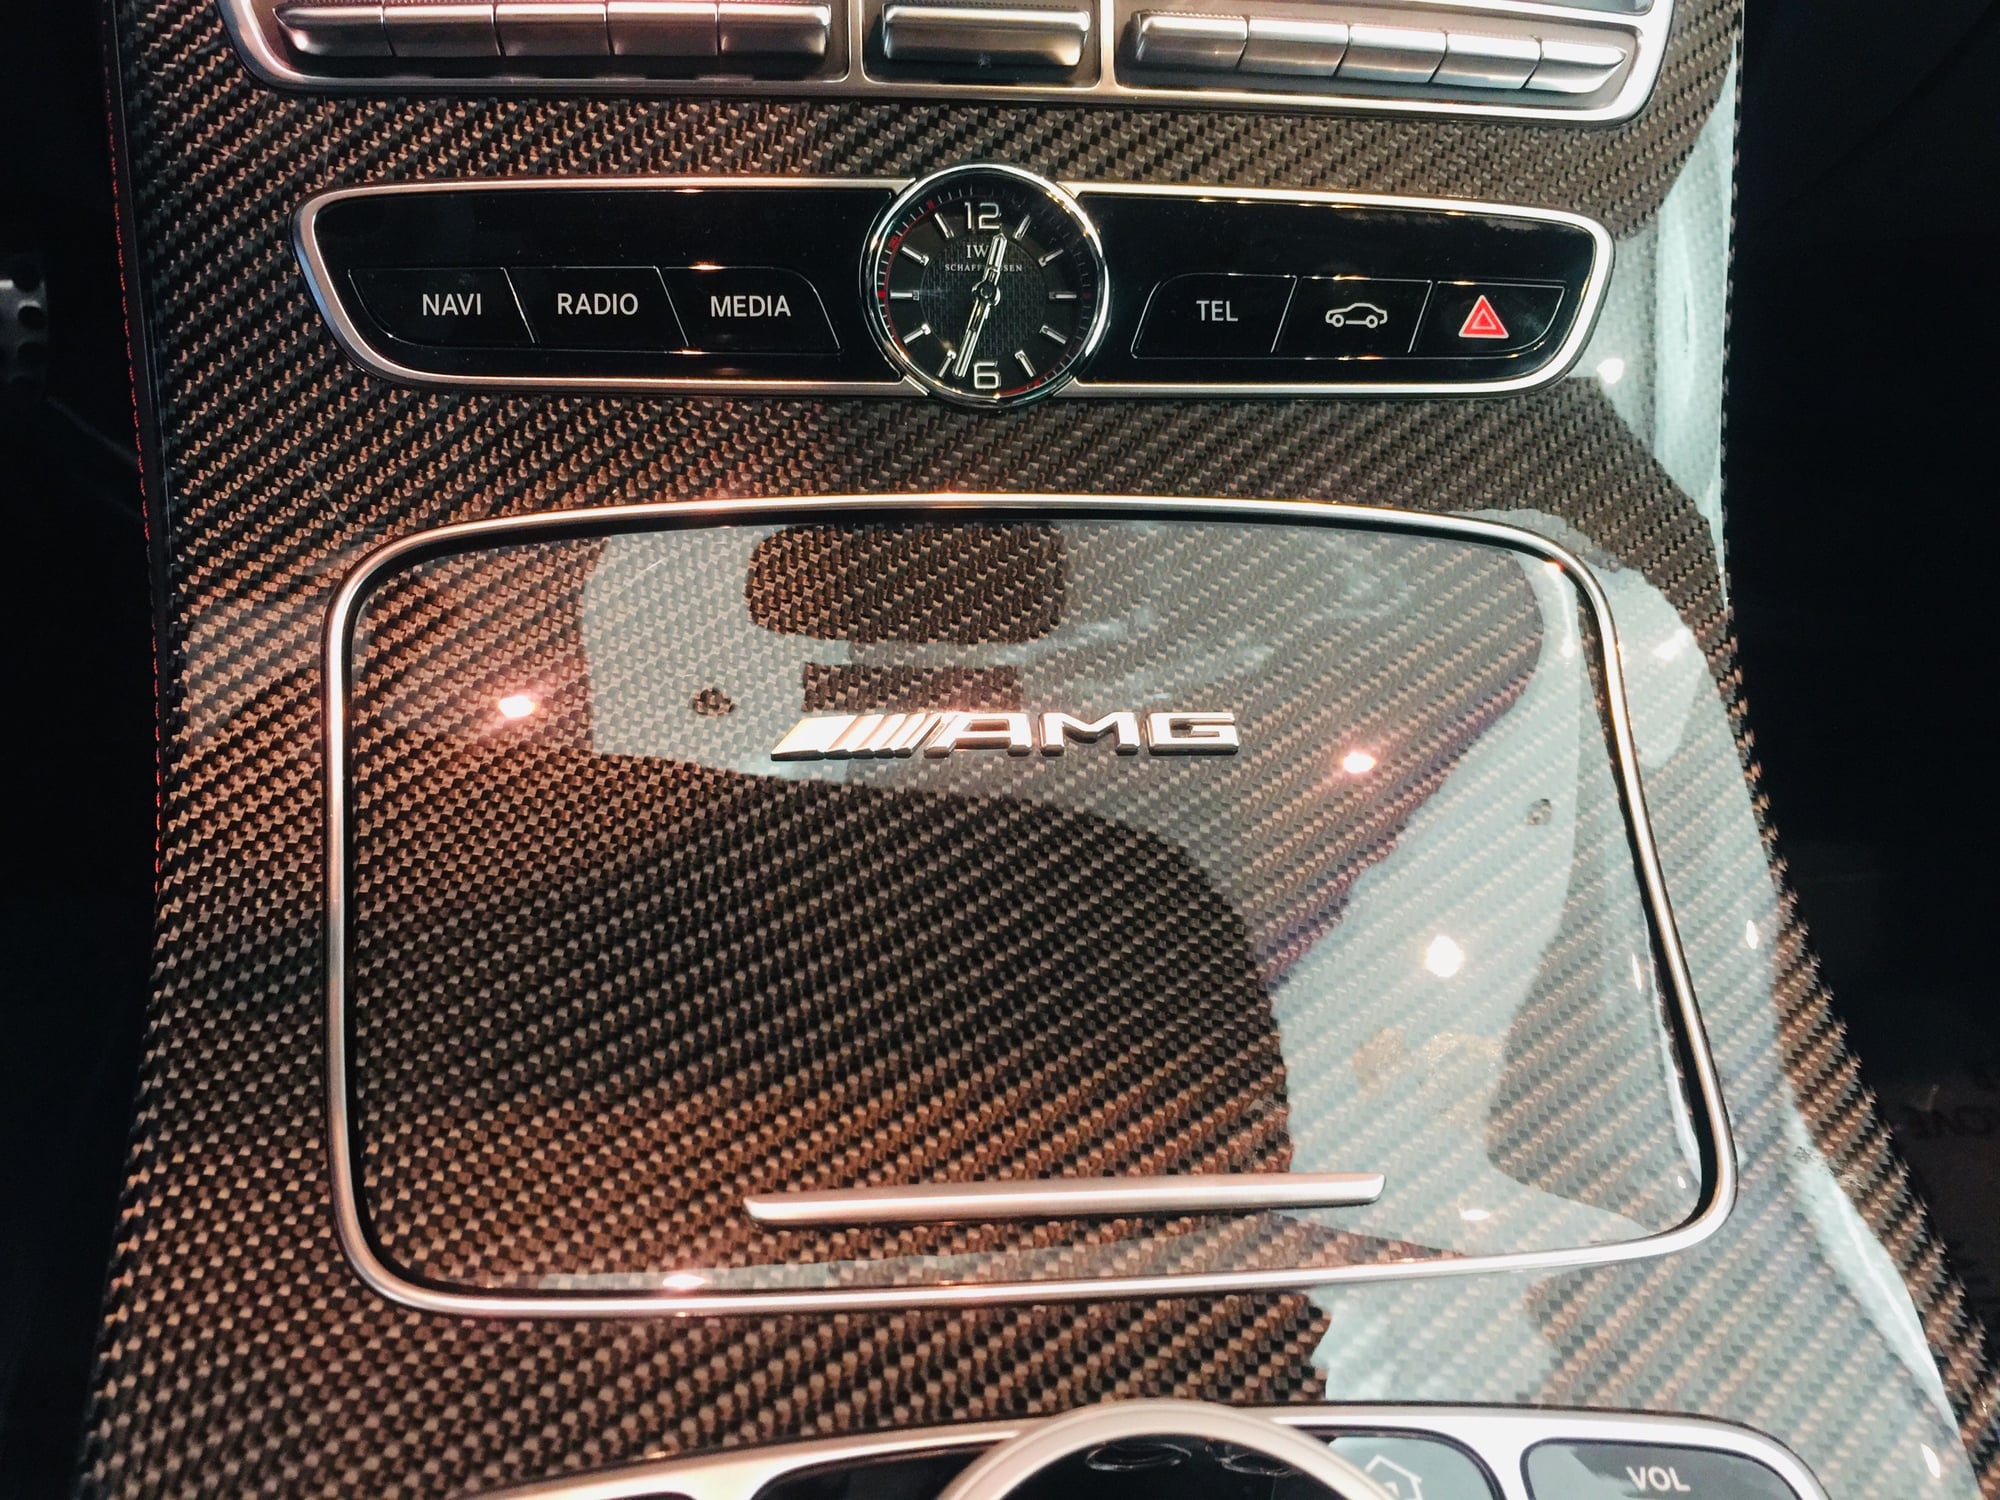 Interior/Upholstery - W213 Carbon Fiber Center Console - New - 2018 to 2019 Mercedes-Benz E63 AMG S - Chino, CA 91710, United States